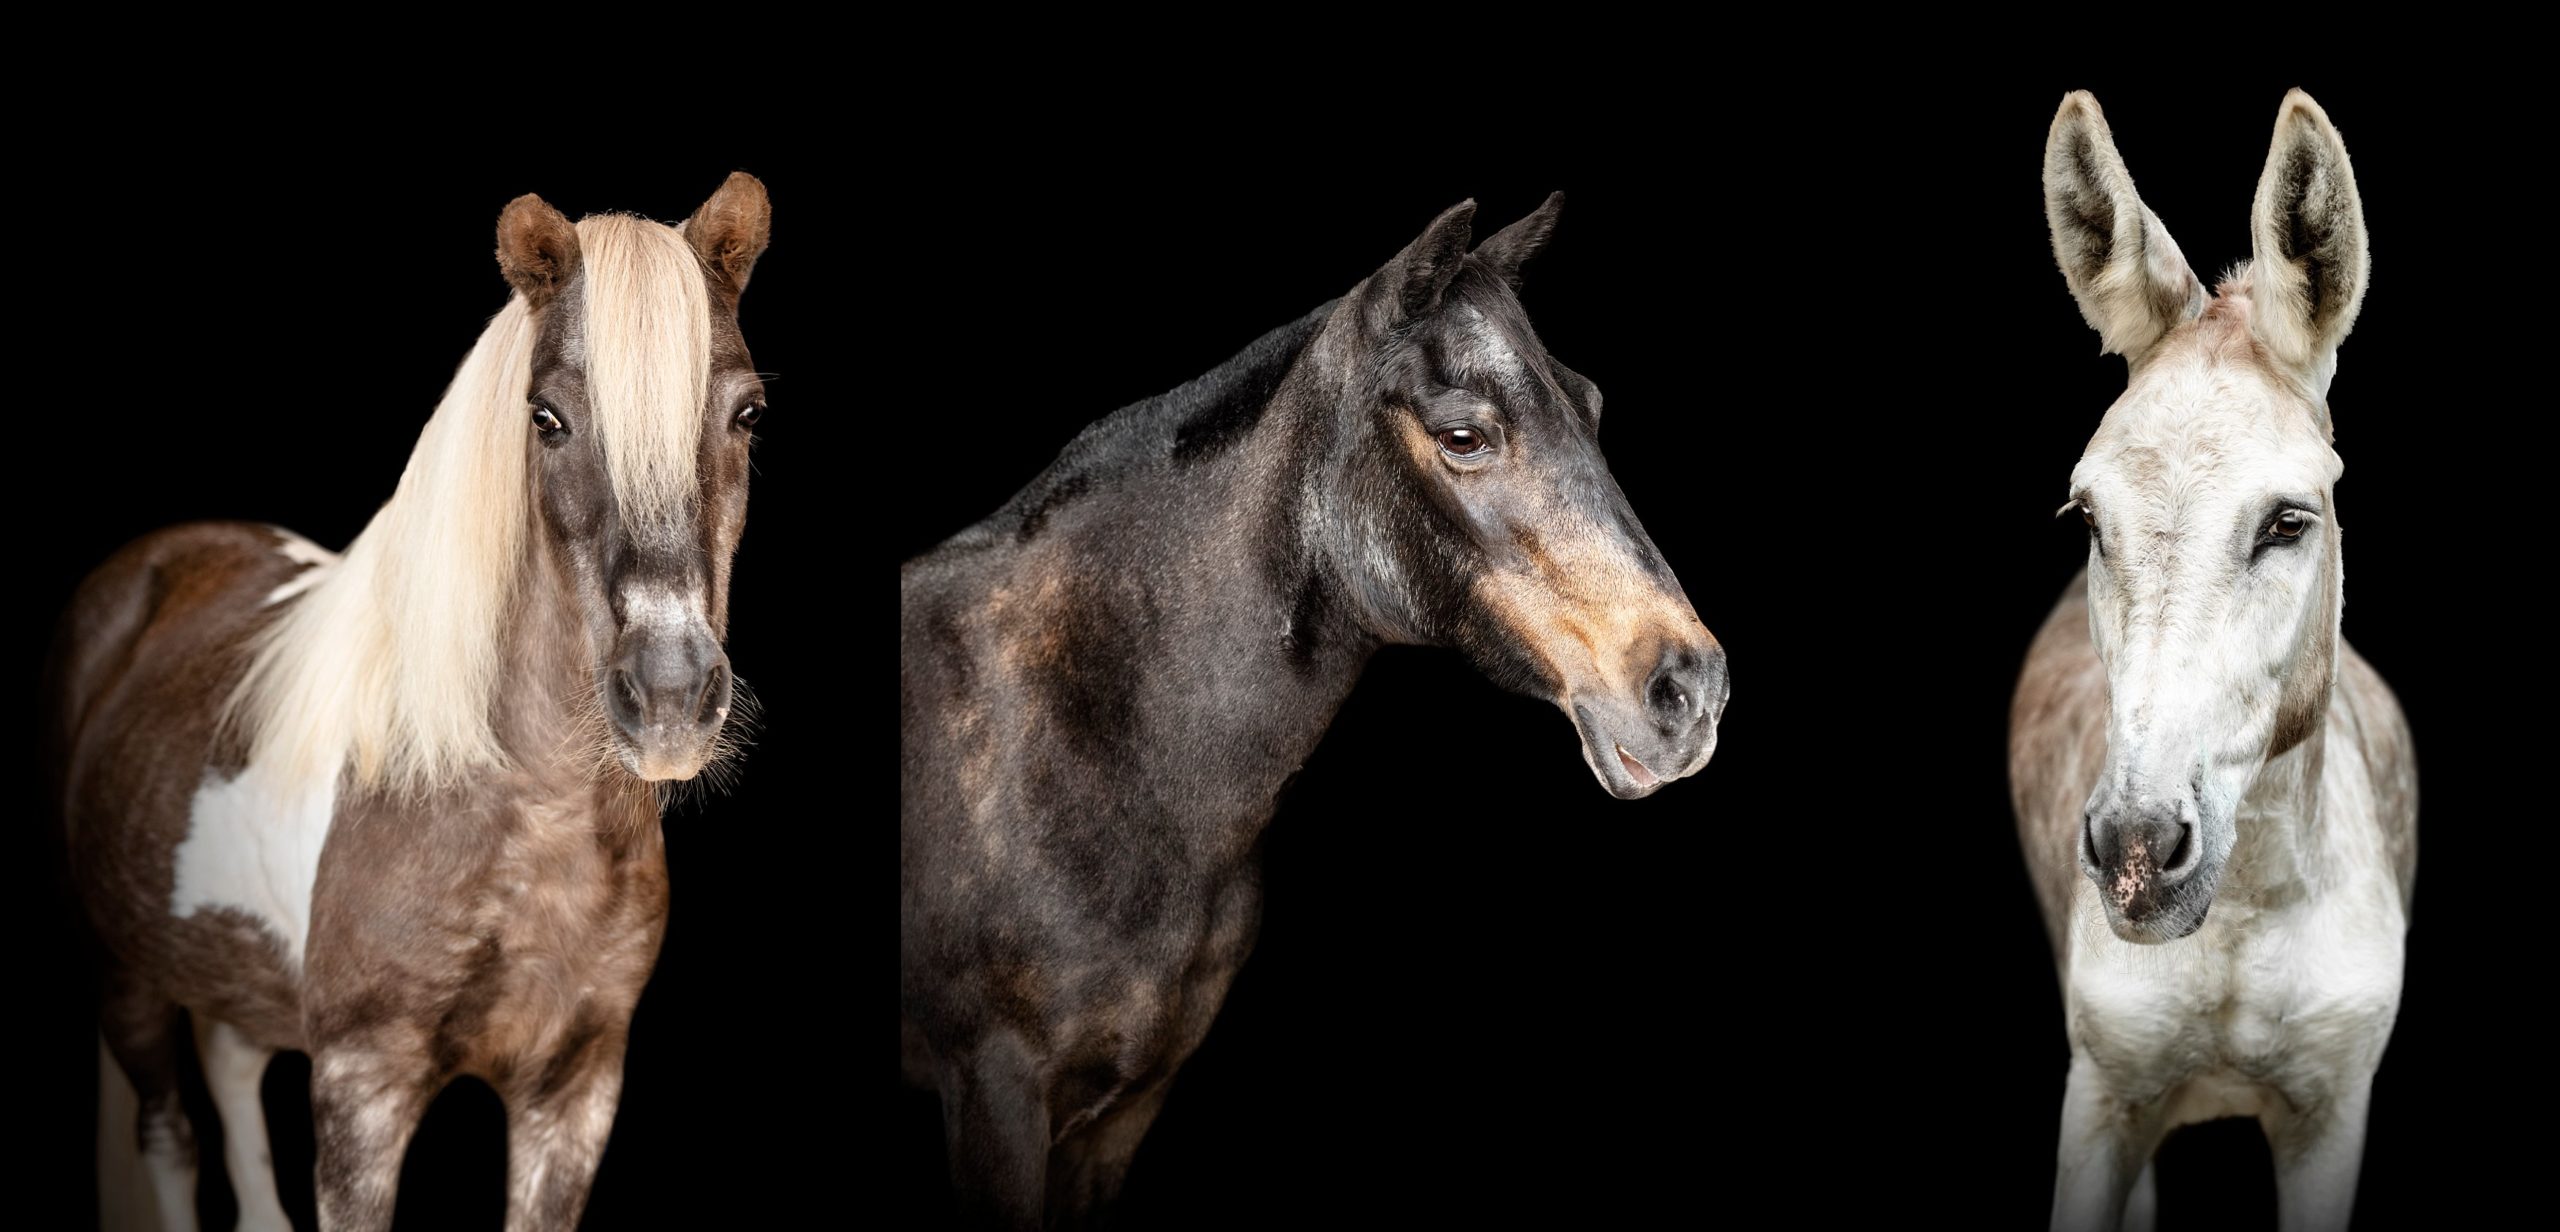 Black background photos of miniature ponies and donkey in Georgia.